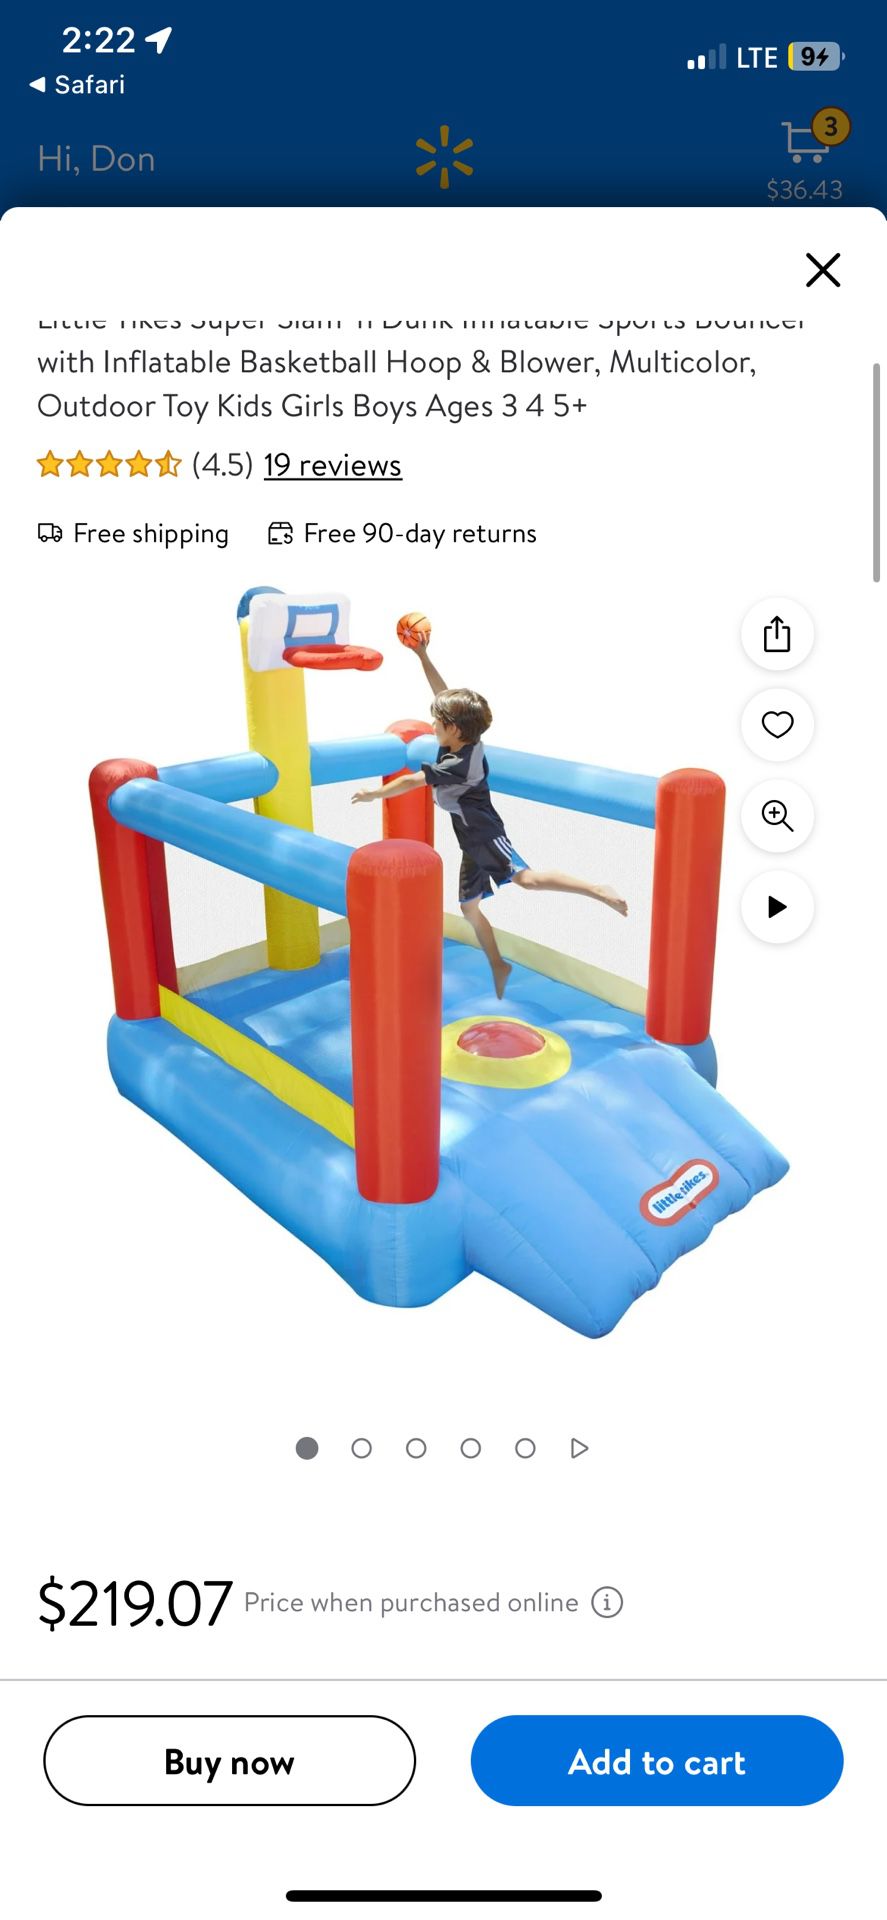 Little Tikes Super Slam 'n Dunk Inflatable Sports Bouncer